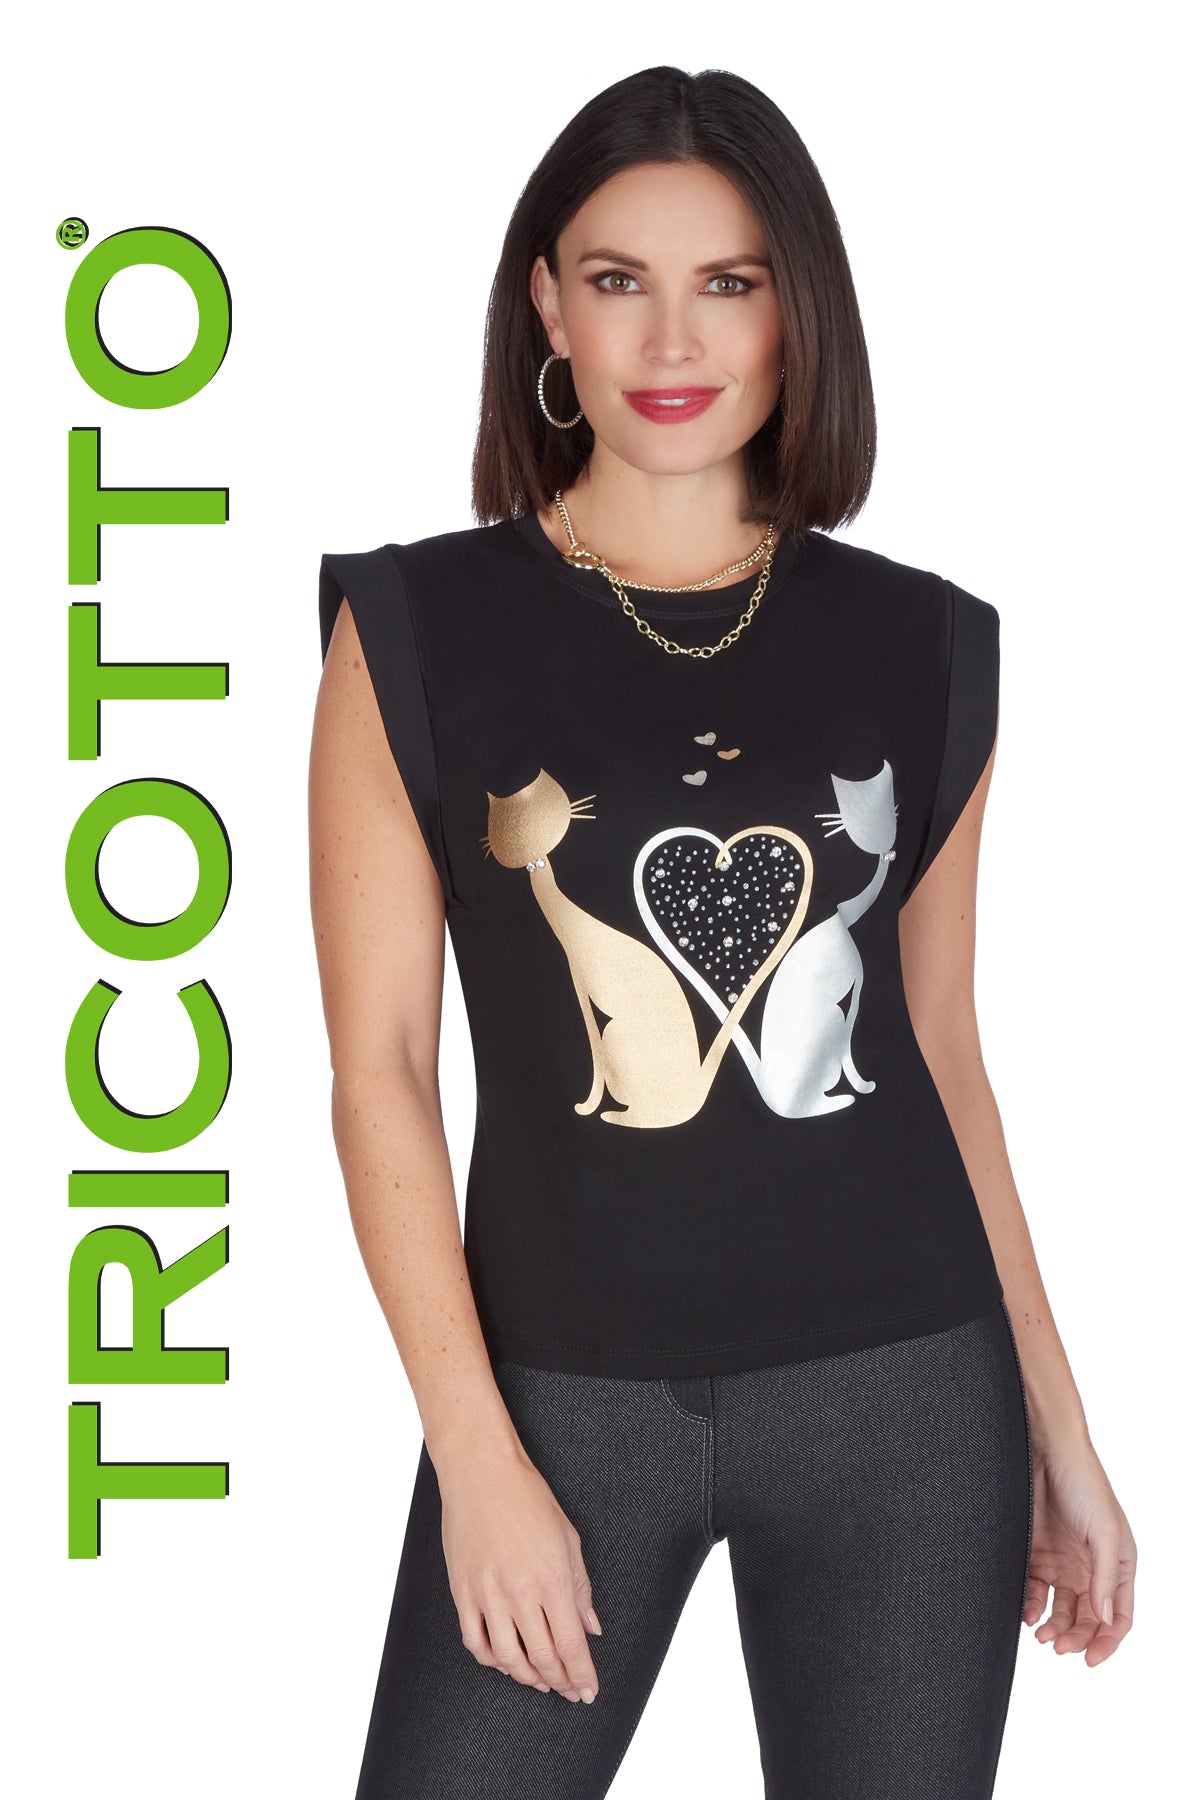 Tricotto T-shirts-Buy Tricotto T-shirts Online-Tricotto Jeans-Tricotto Clothing Quebec-Tricotto Clothing Montreal-Tricotto Online T-shirt Shop